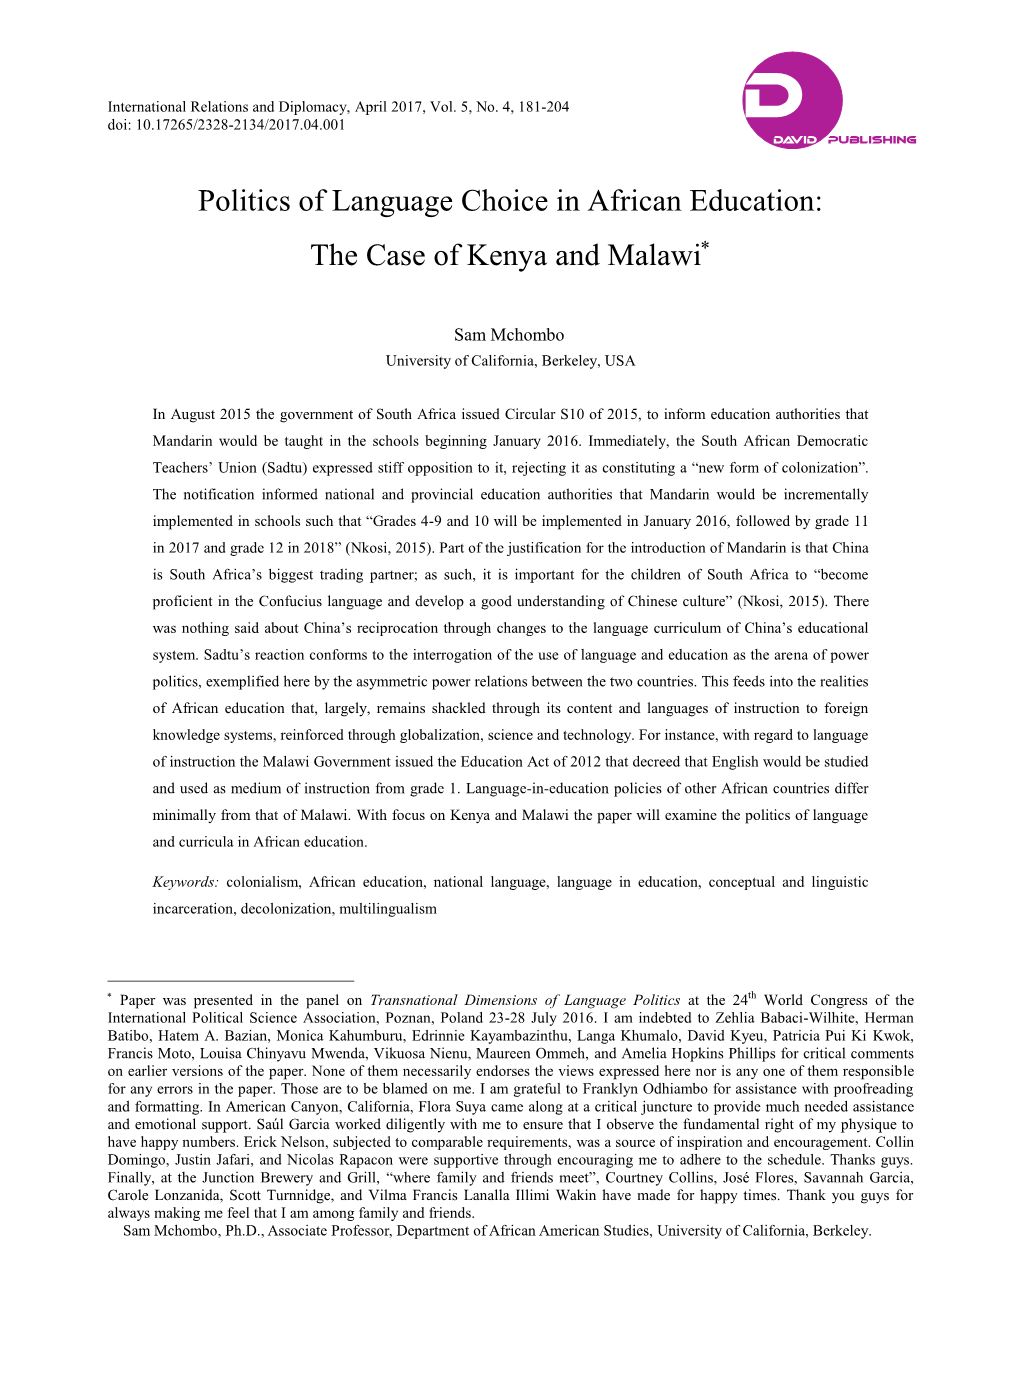 Politics of Language Choice in African Education: the Case of Kenya and Malawi